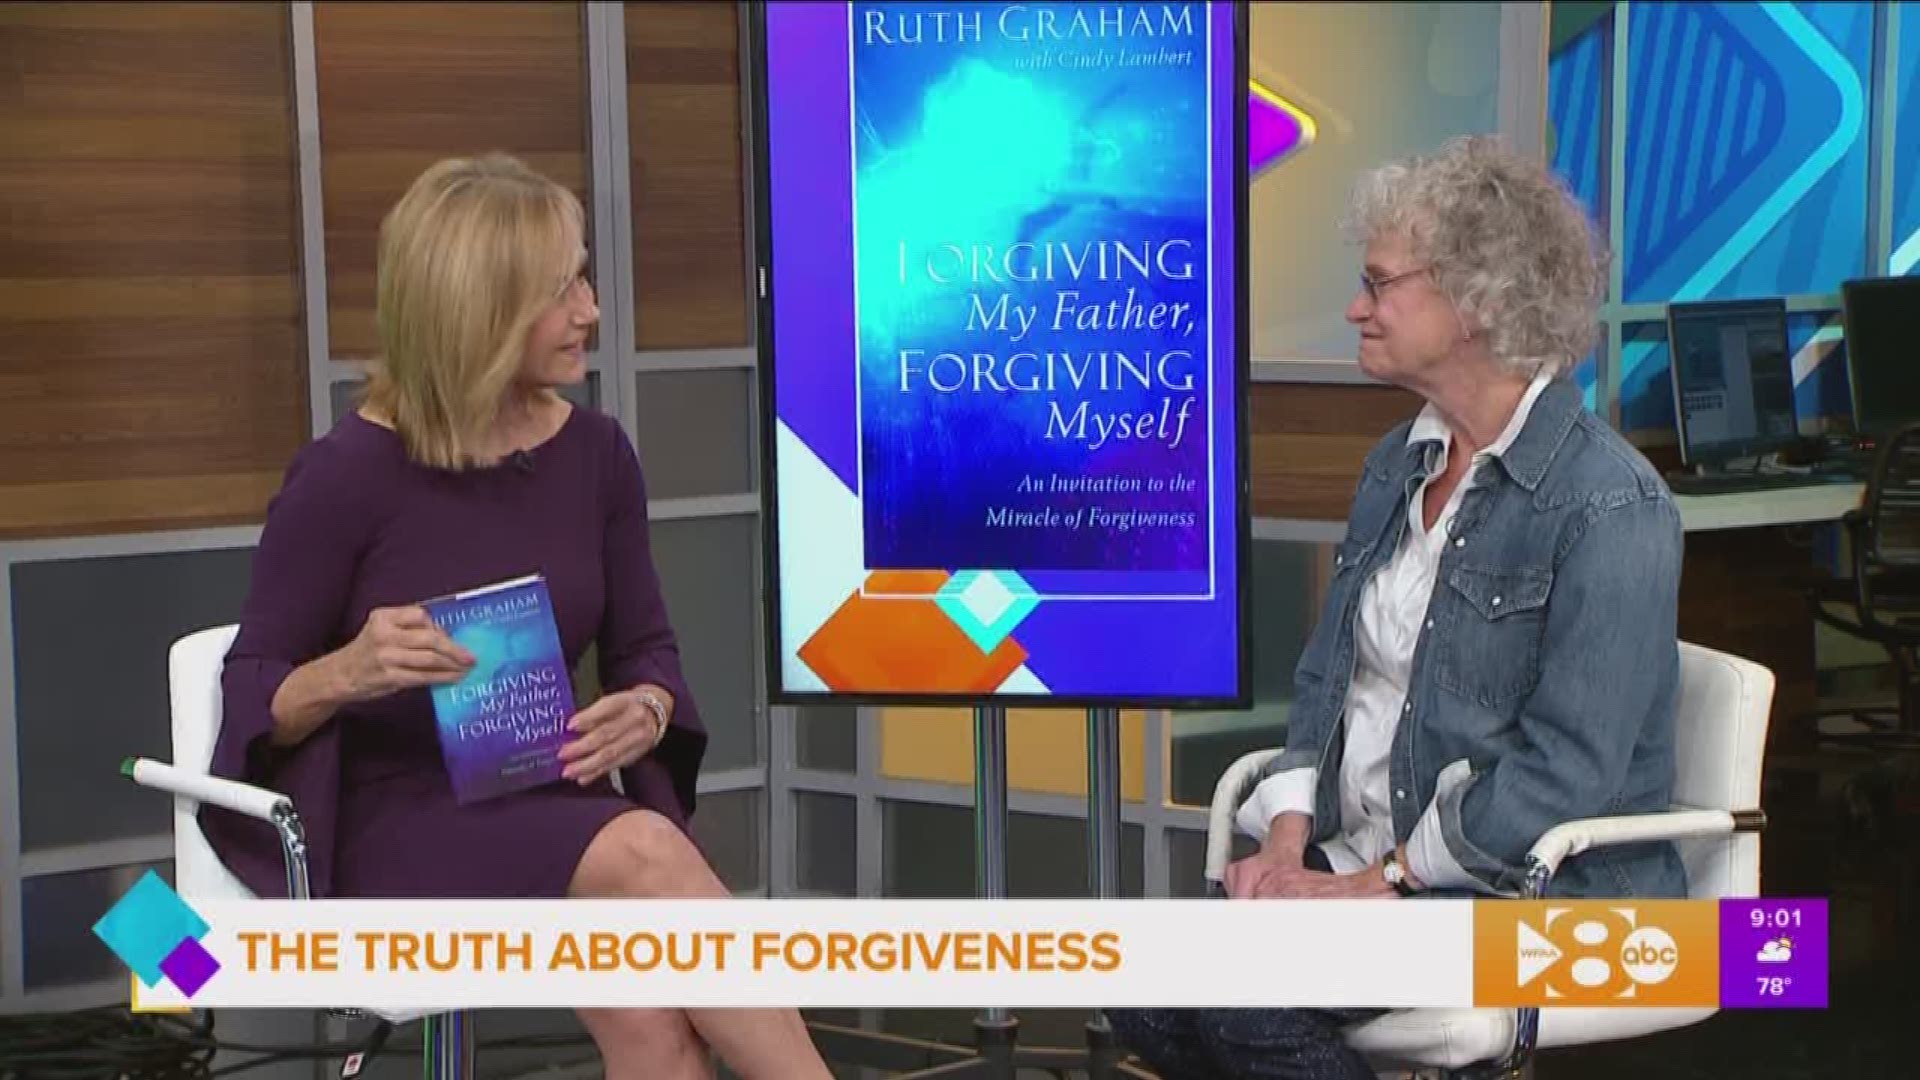 "Forgiving my Father, Forgiving Myself" is now available at all major bookstores.  Go to www.ruthgraham.com/forgiving for more information.